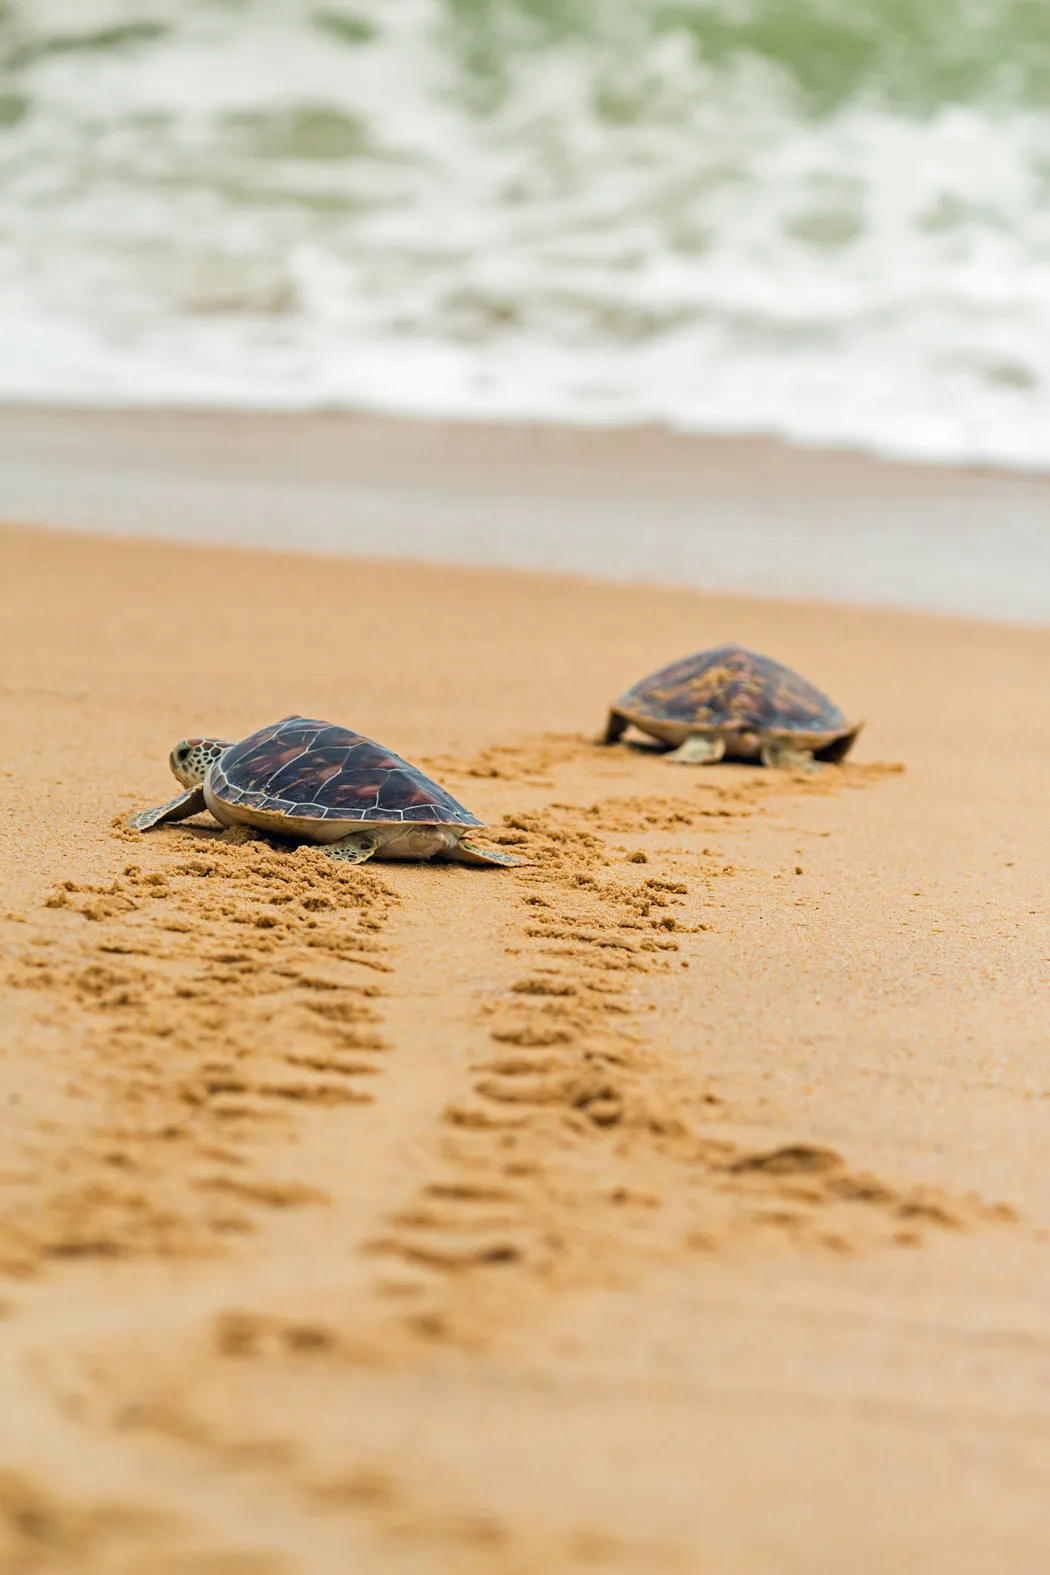 Baby turtles make their way across the sand to the sea